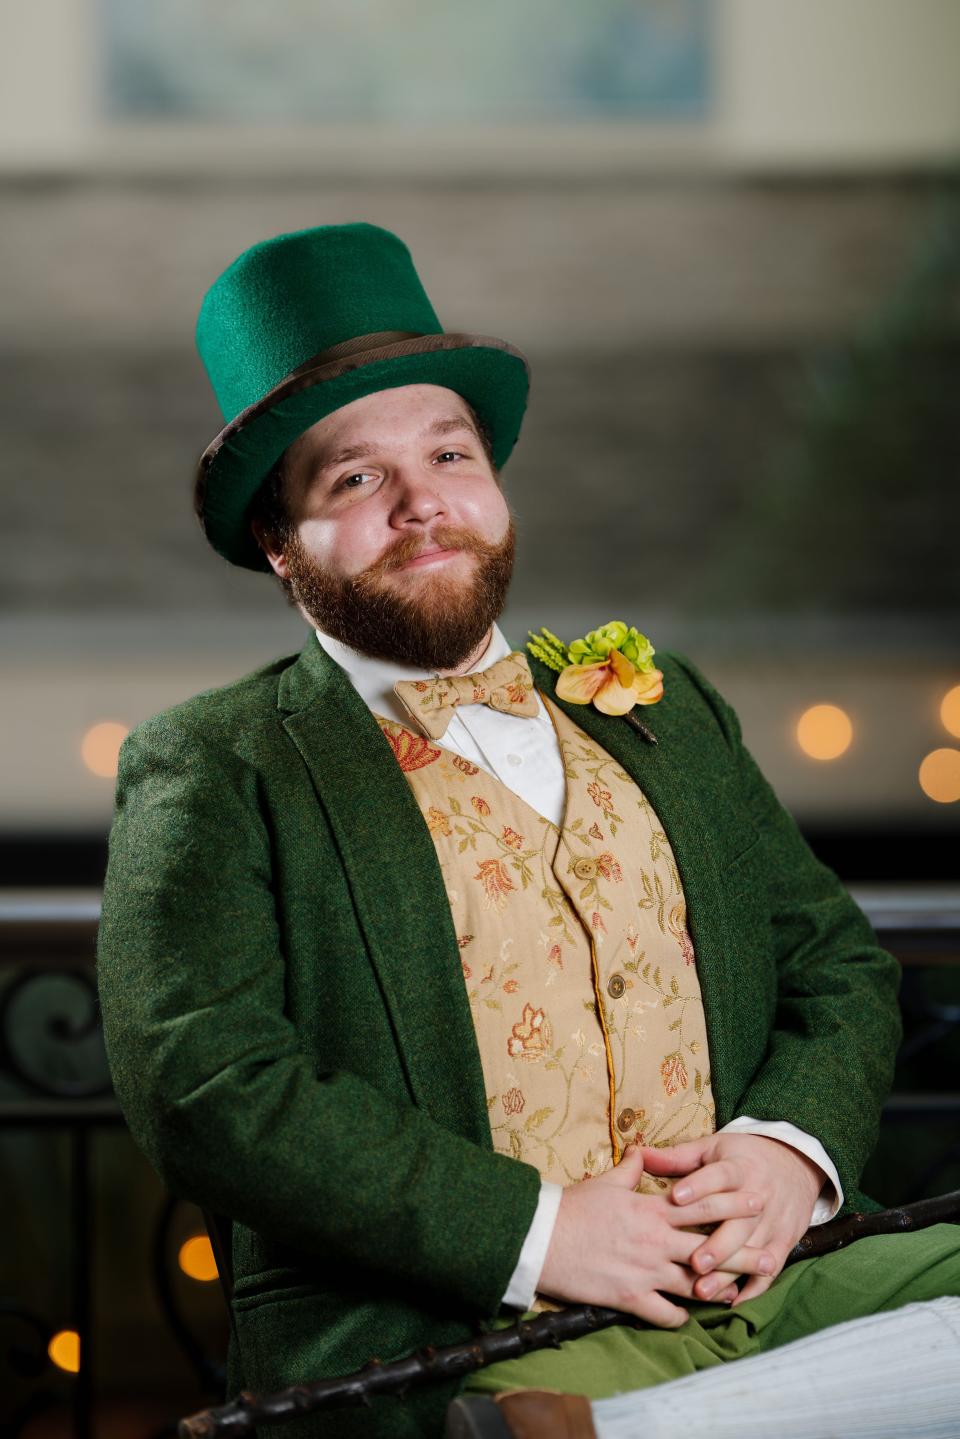 In the role of leprechaun, Luke Dowdell of Spencerport will lead off the 2023 Tops Rochester St. Patrick's Day Parade.